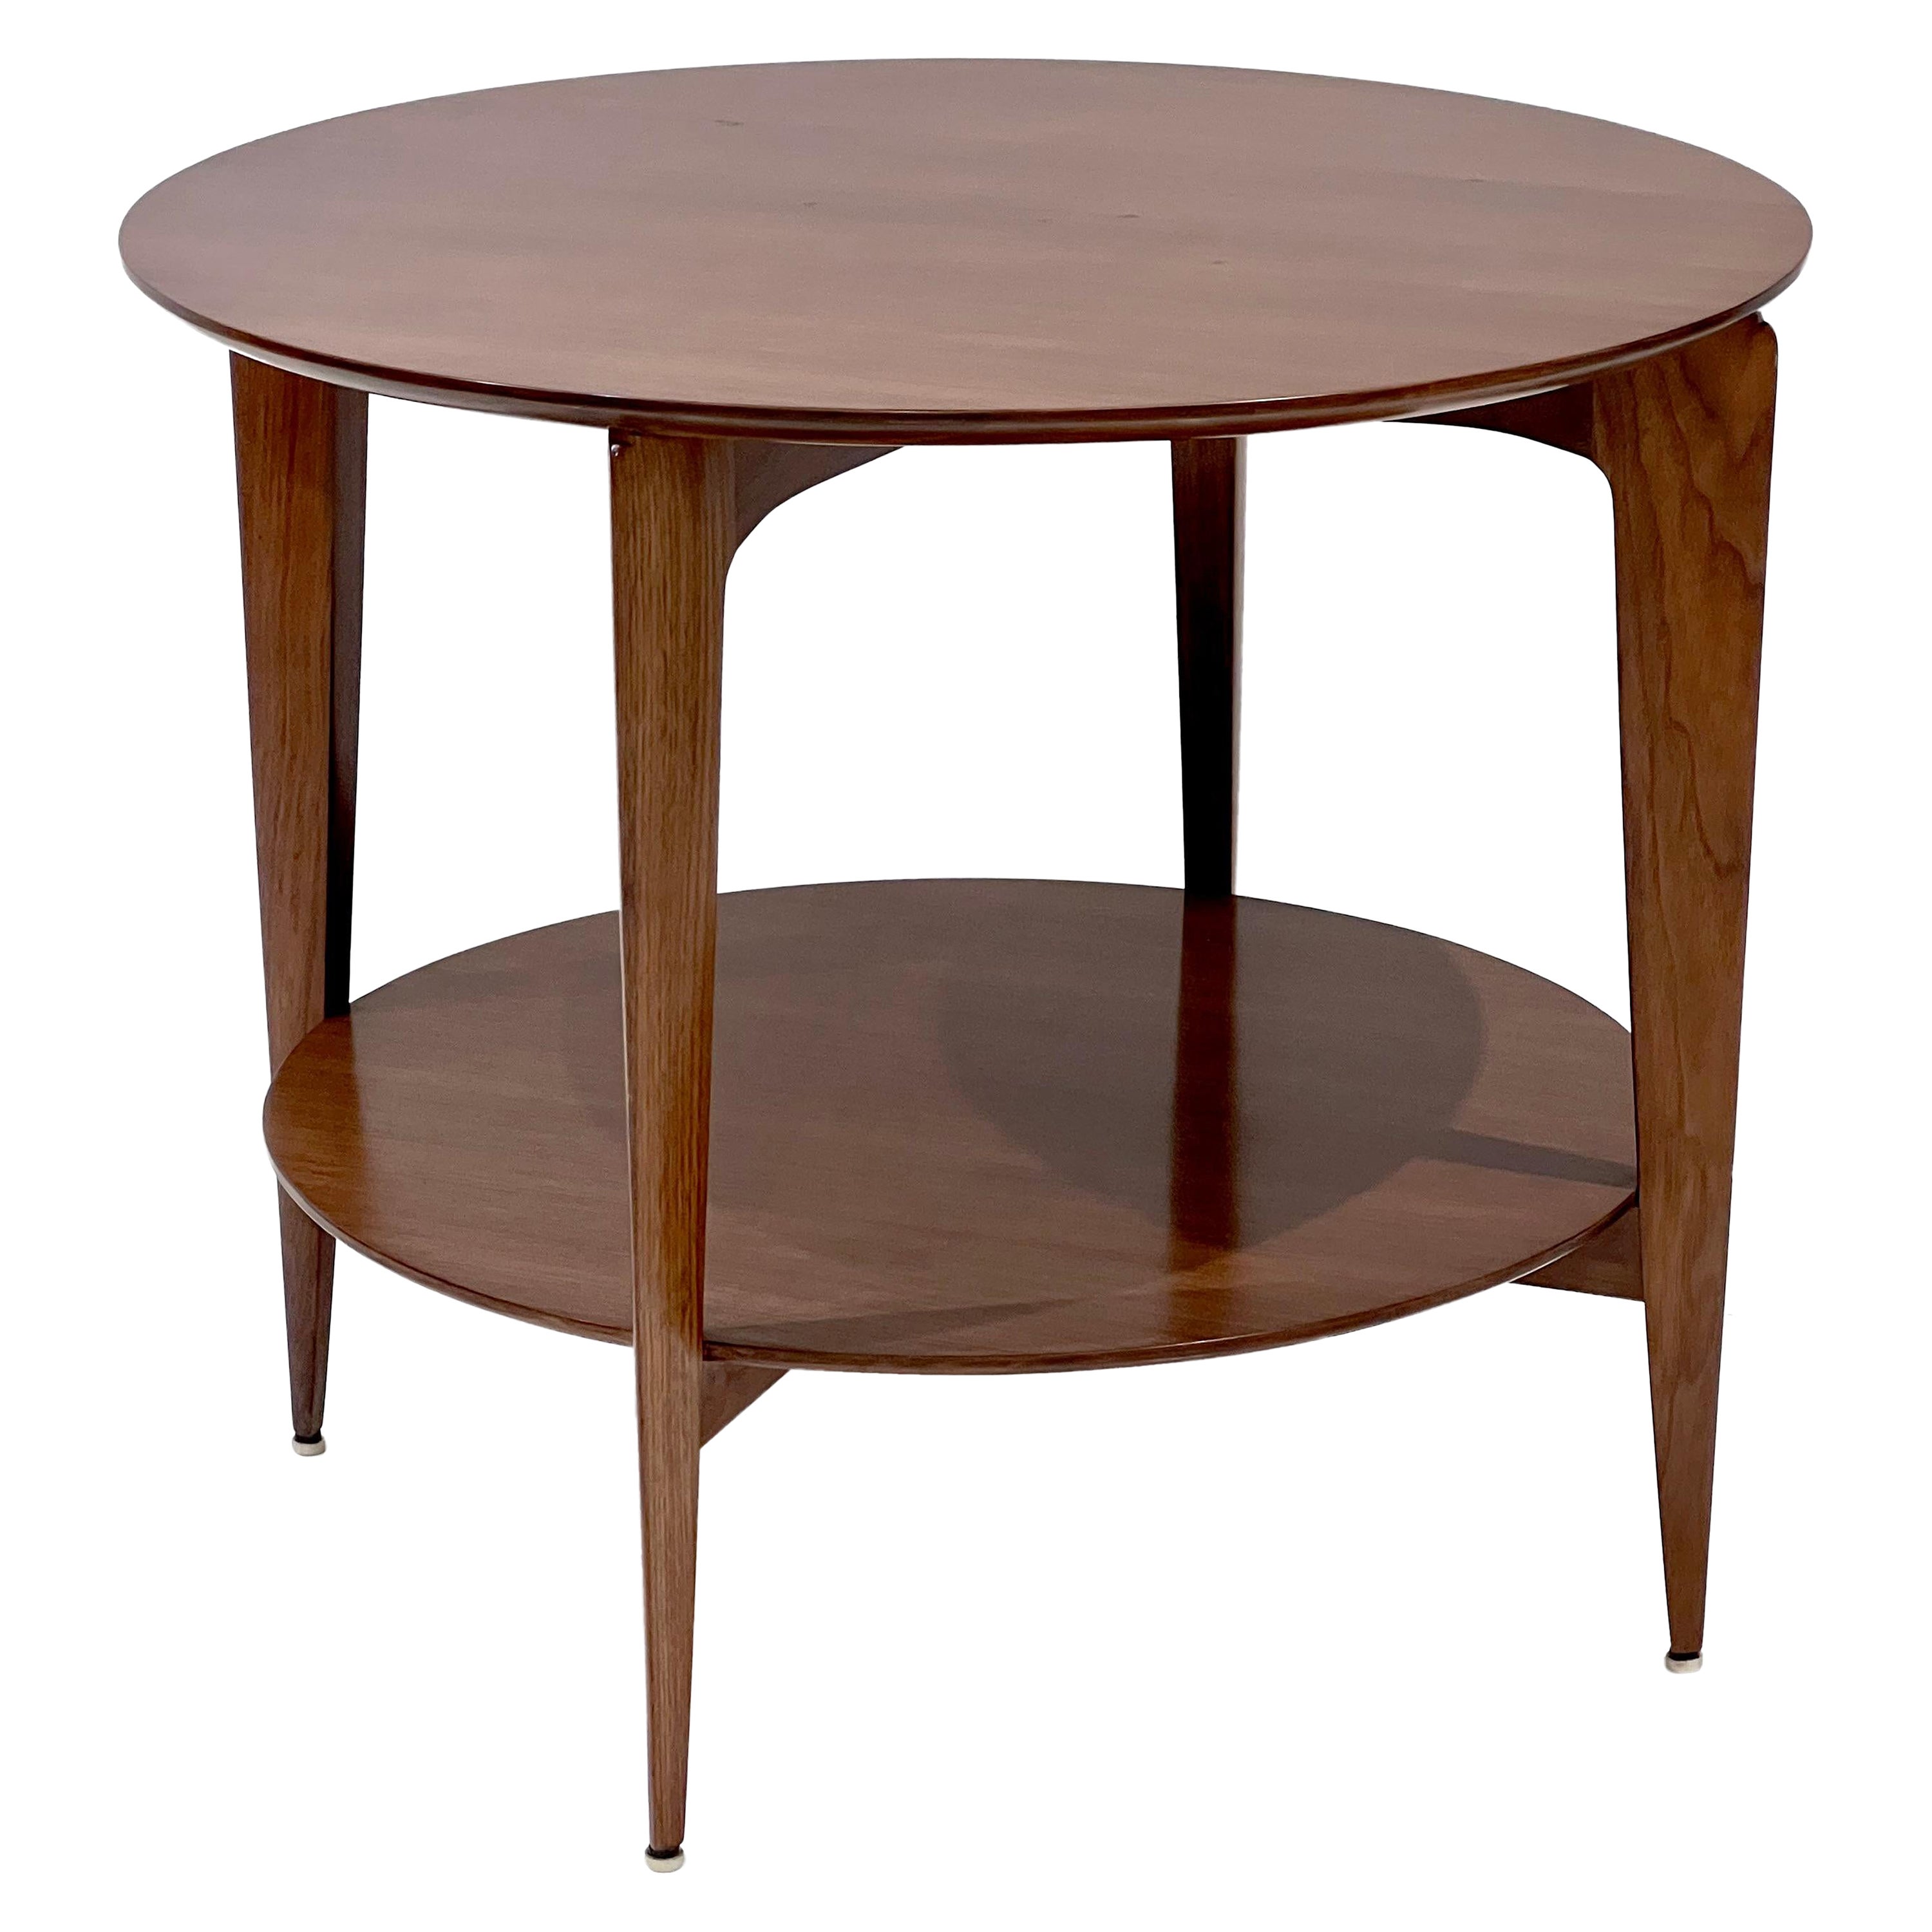 Two-Tiered Occasional Table by Gio Ponti for Singer & Sons. For Sale